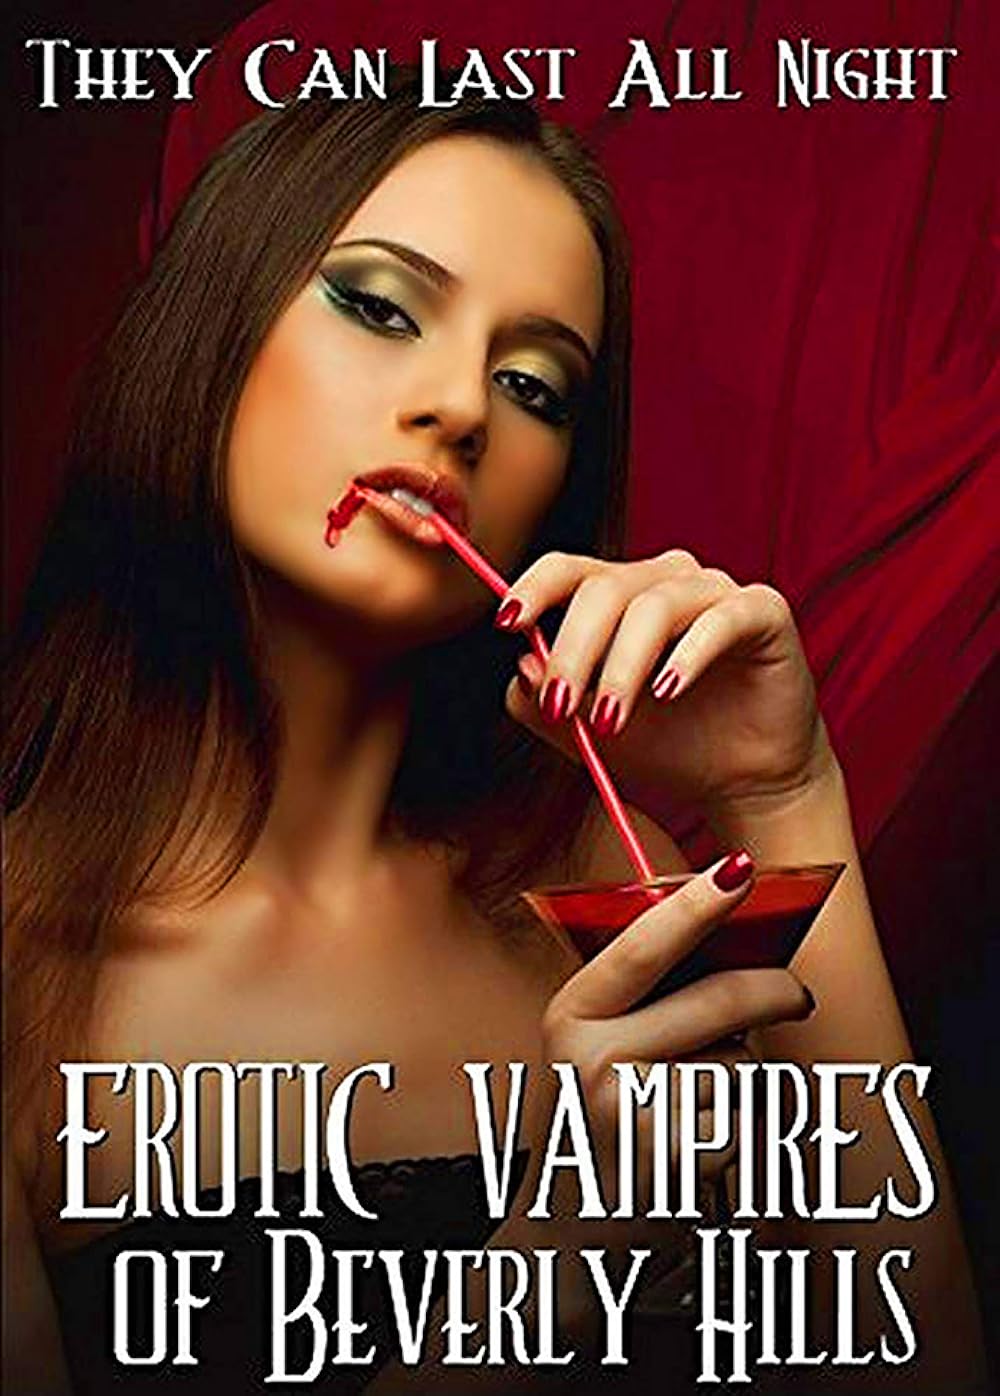 bob yarber recommends Erotic Vampires Of Beverly Hills Cast